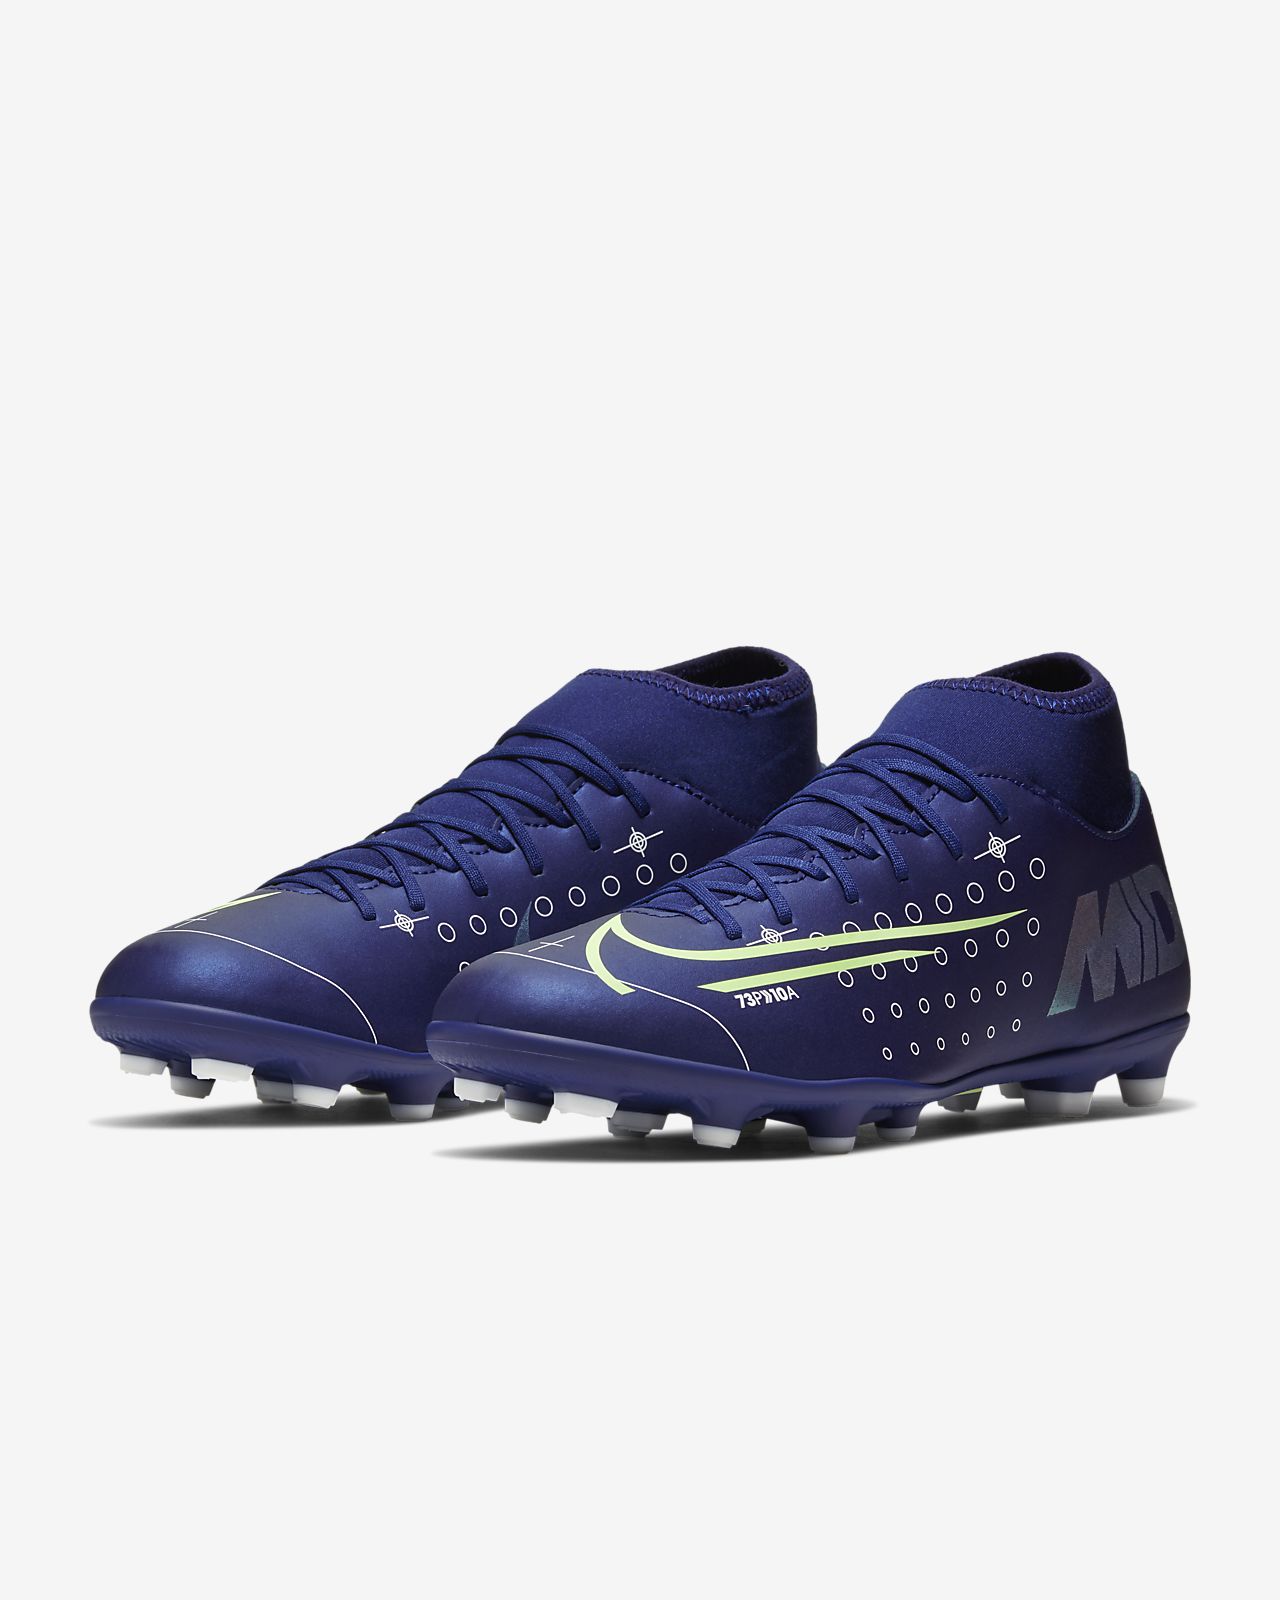 Nike Superfly 7 Academy Fg mg Unisex Mens At7946 414.